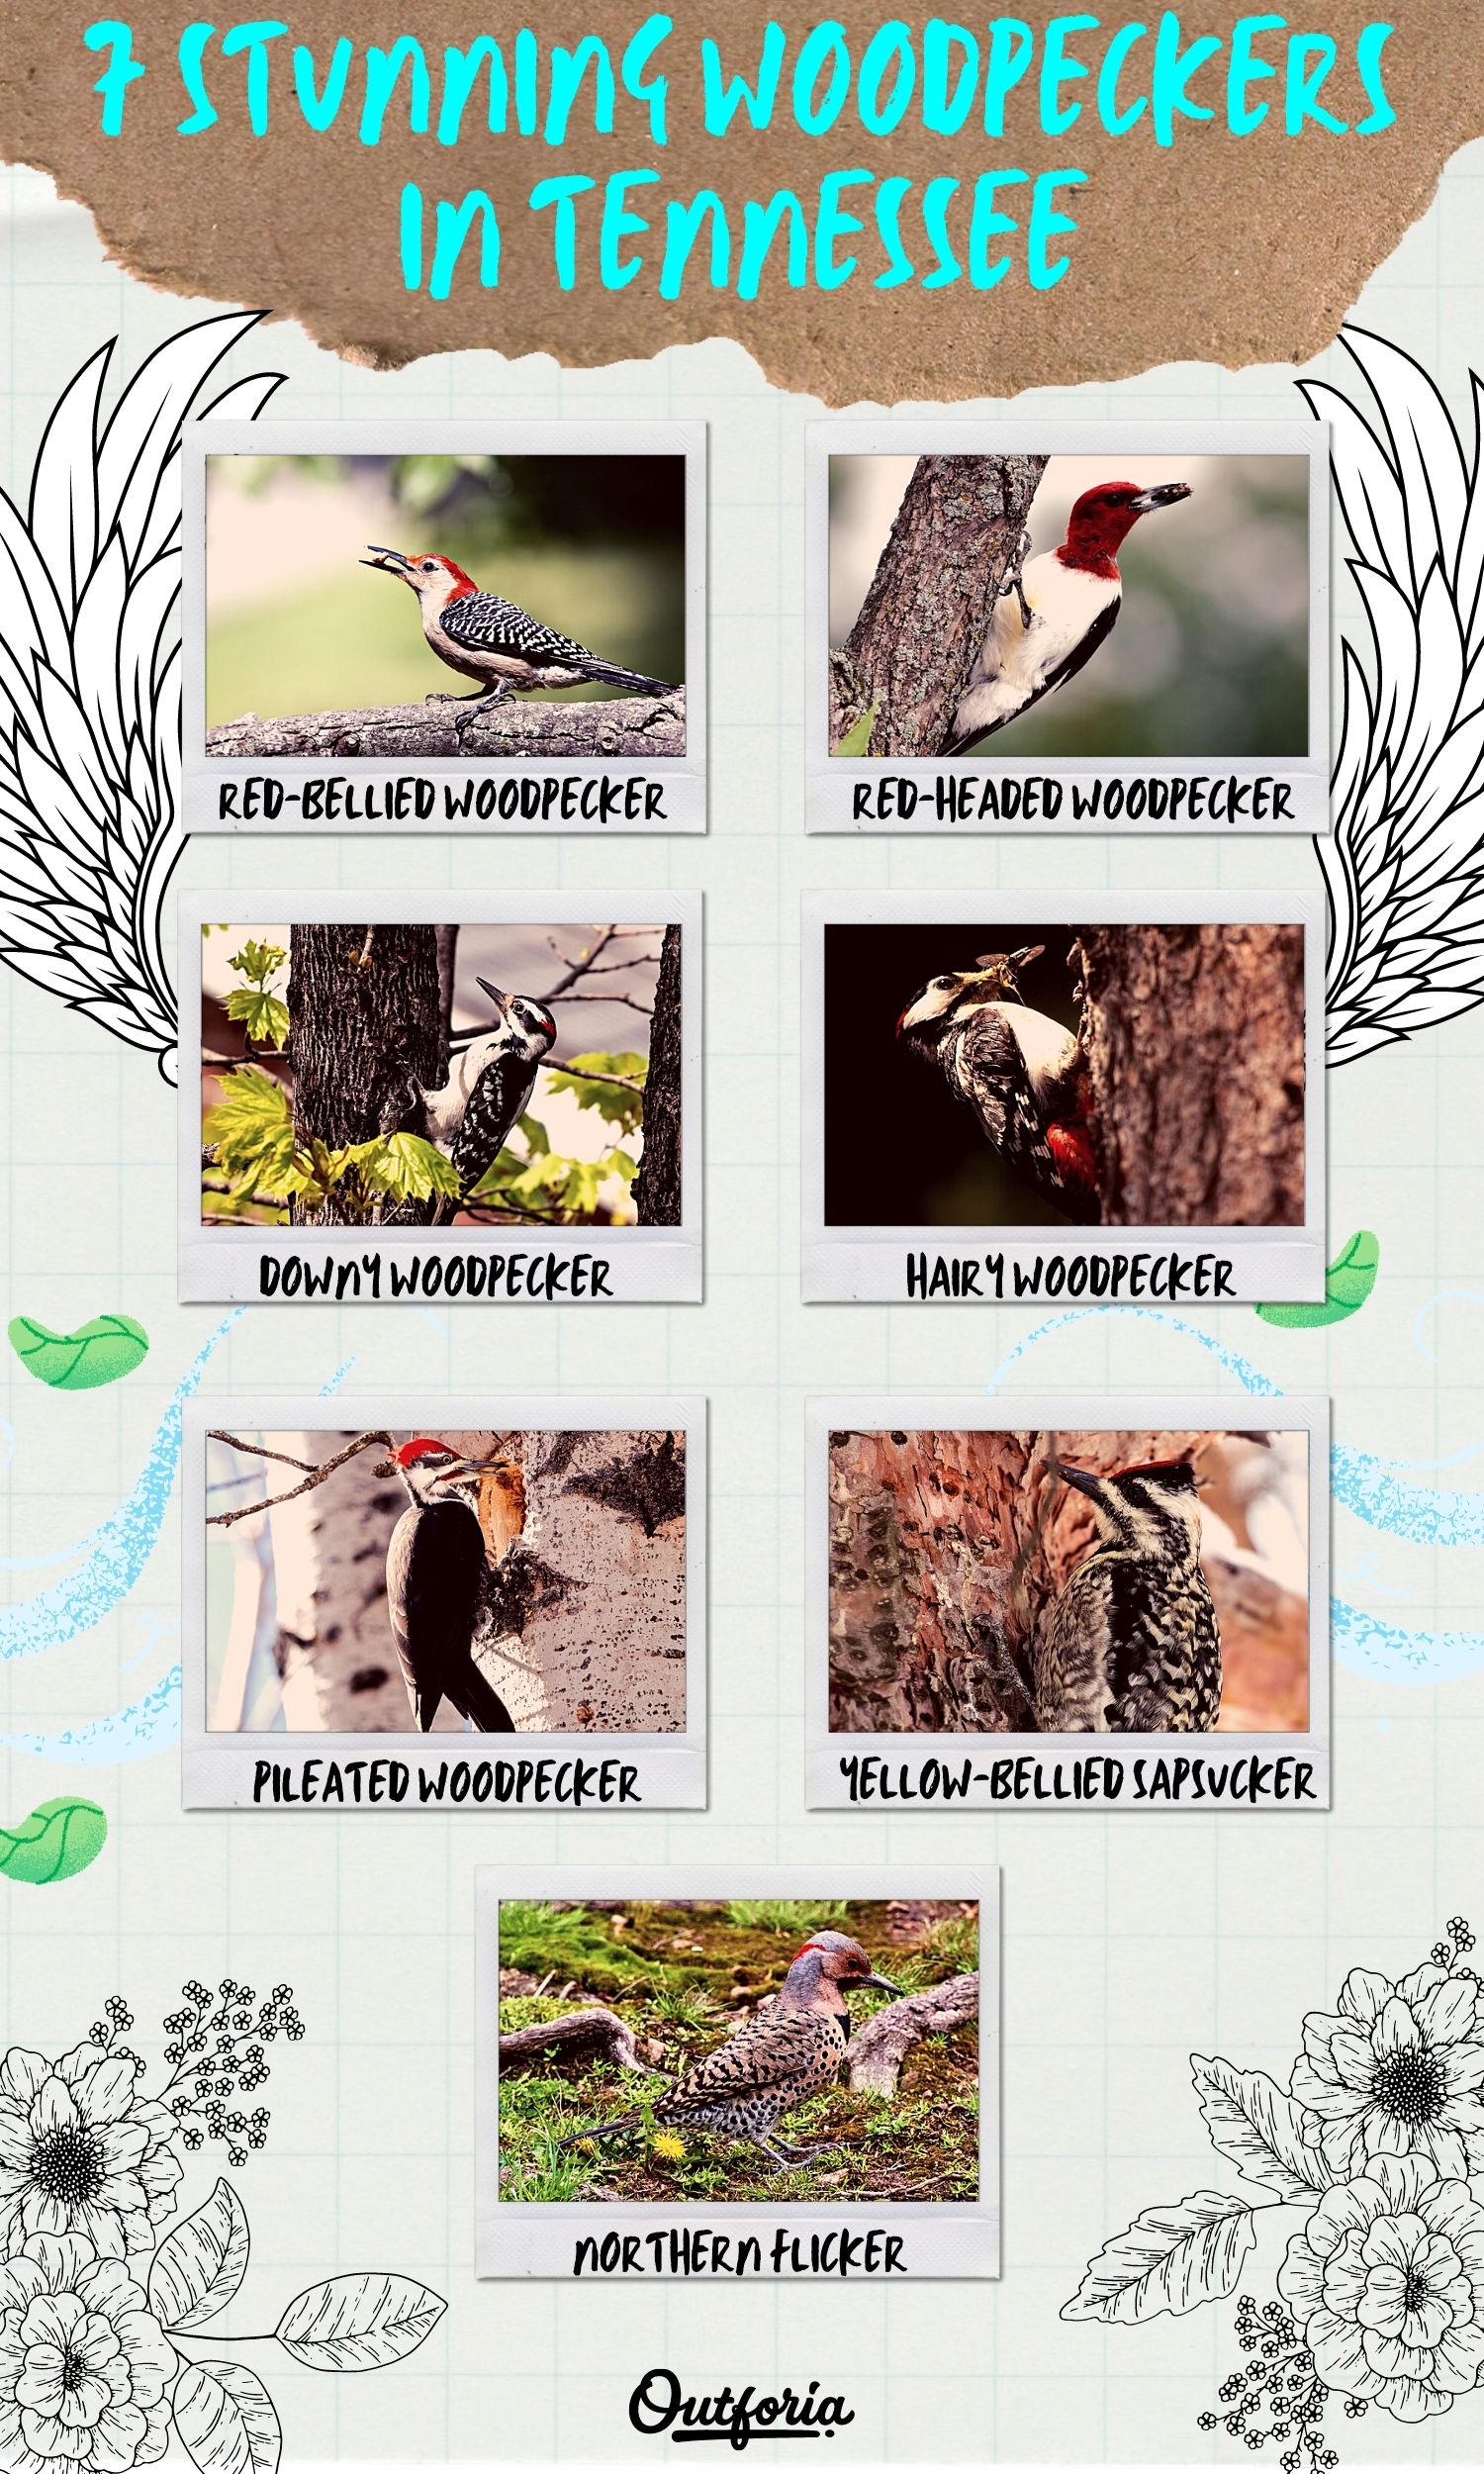 Different chart of woodpeckers in Tennessee